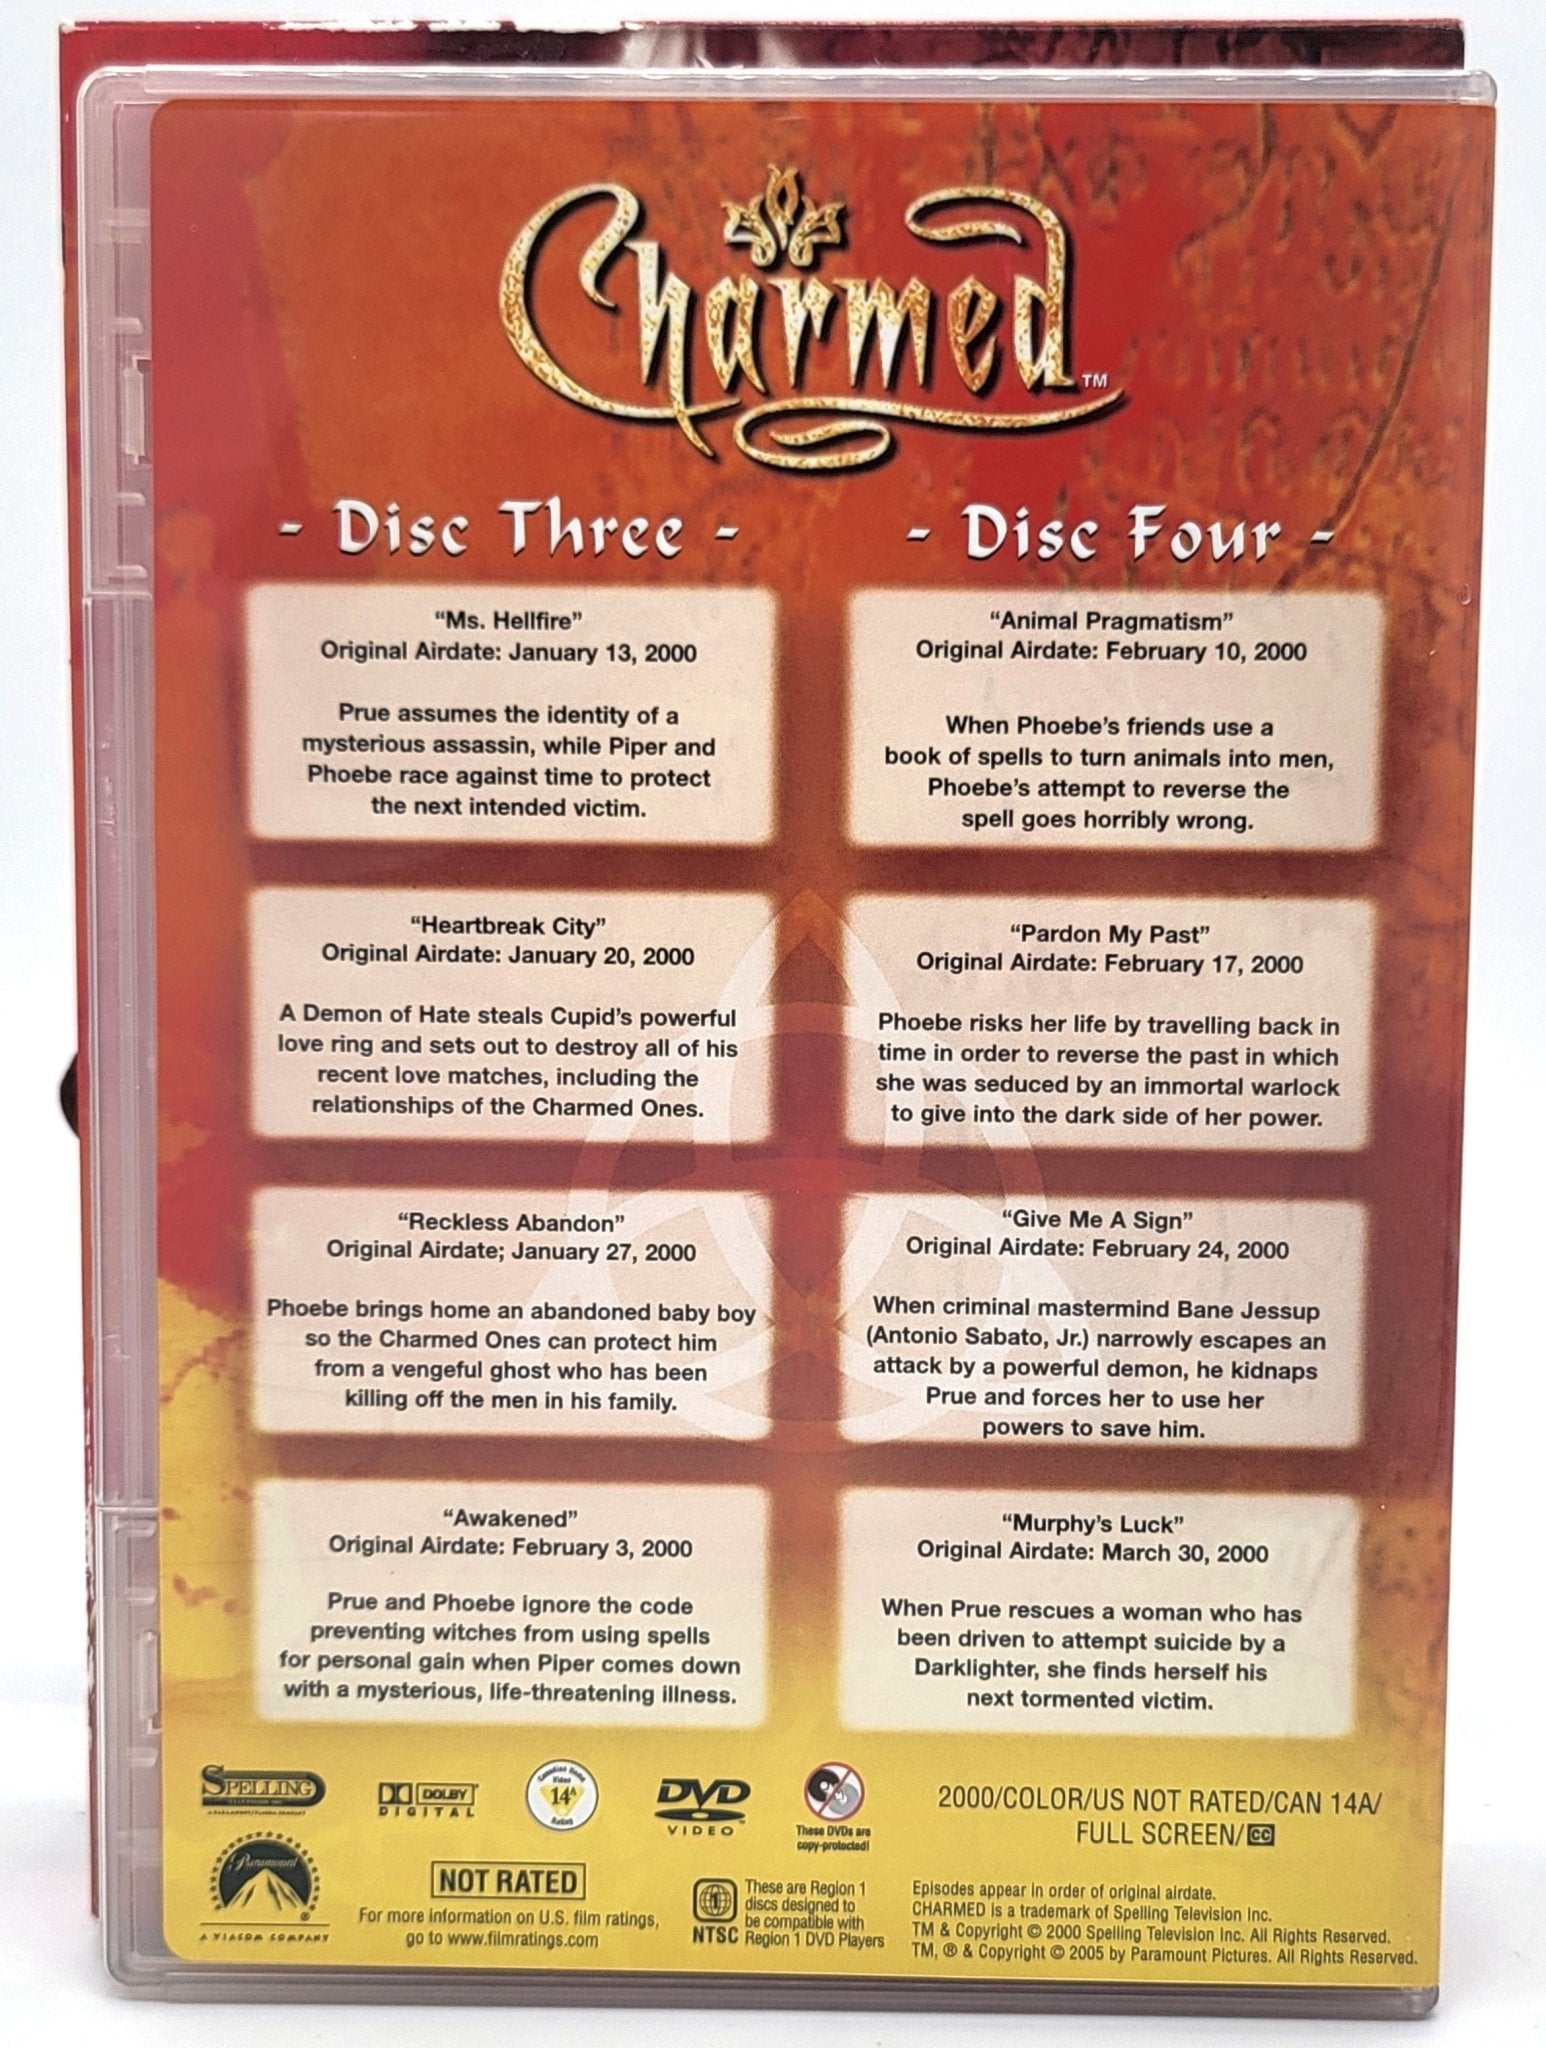 Paramount Pictures Home Entertainment - Charmed | DVD | The Complete Second Season - DVD - Steady Bunny Shop